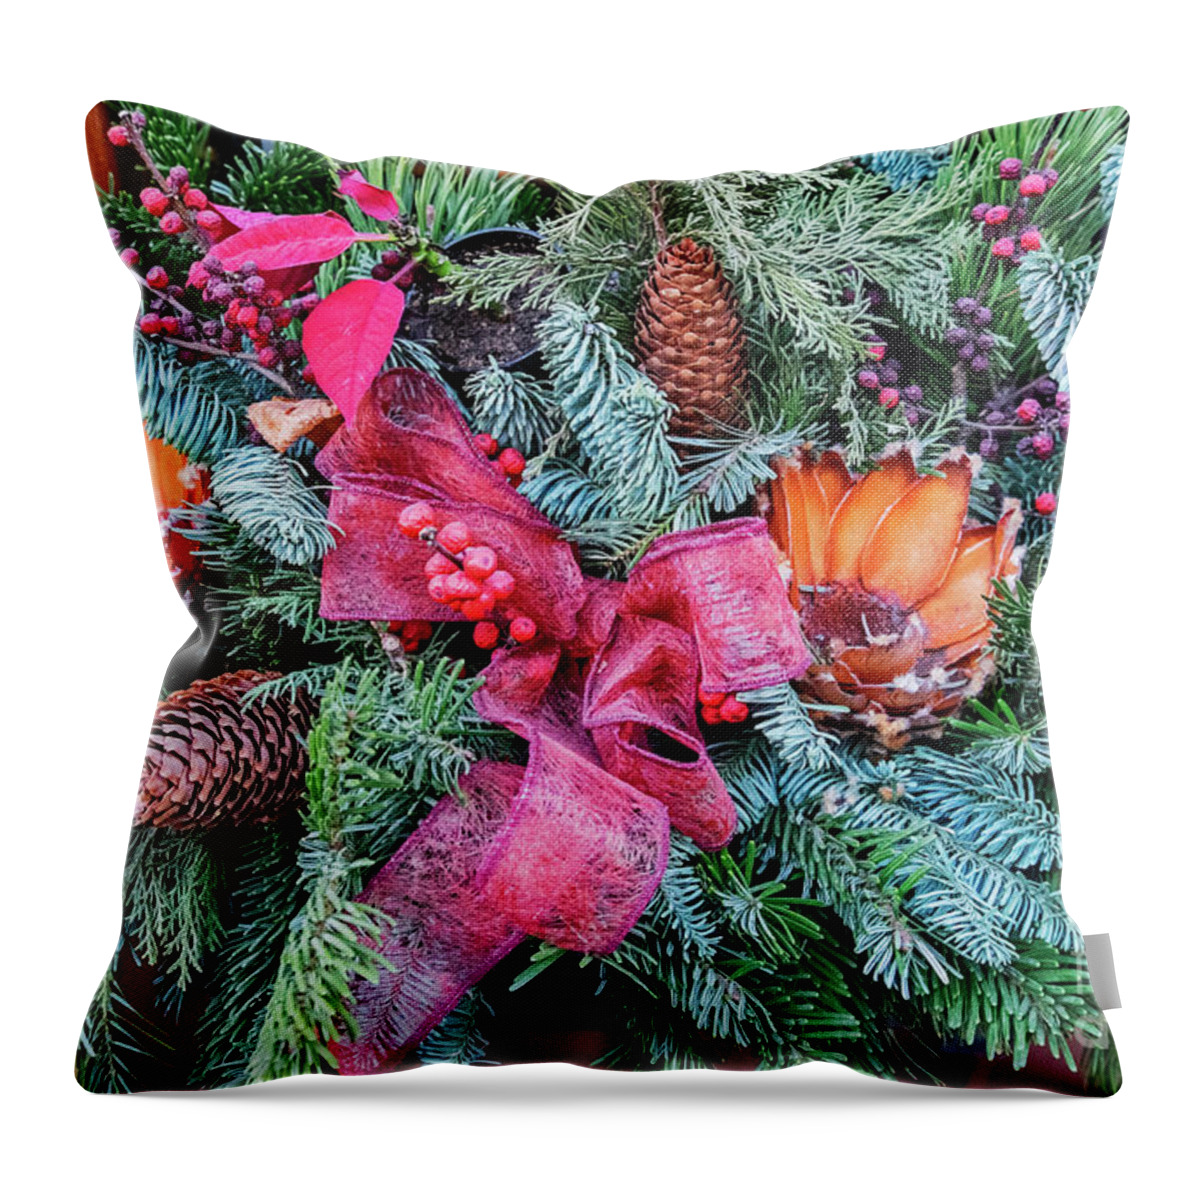 Art Throw Pillow featuring the photograph Traditional Winter Decoration #2 by Ariadna De Raadt